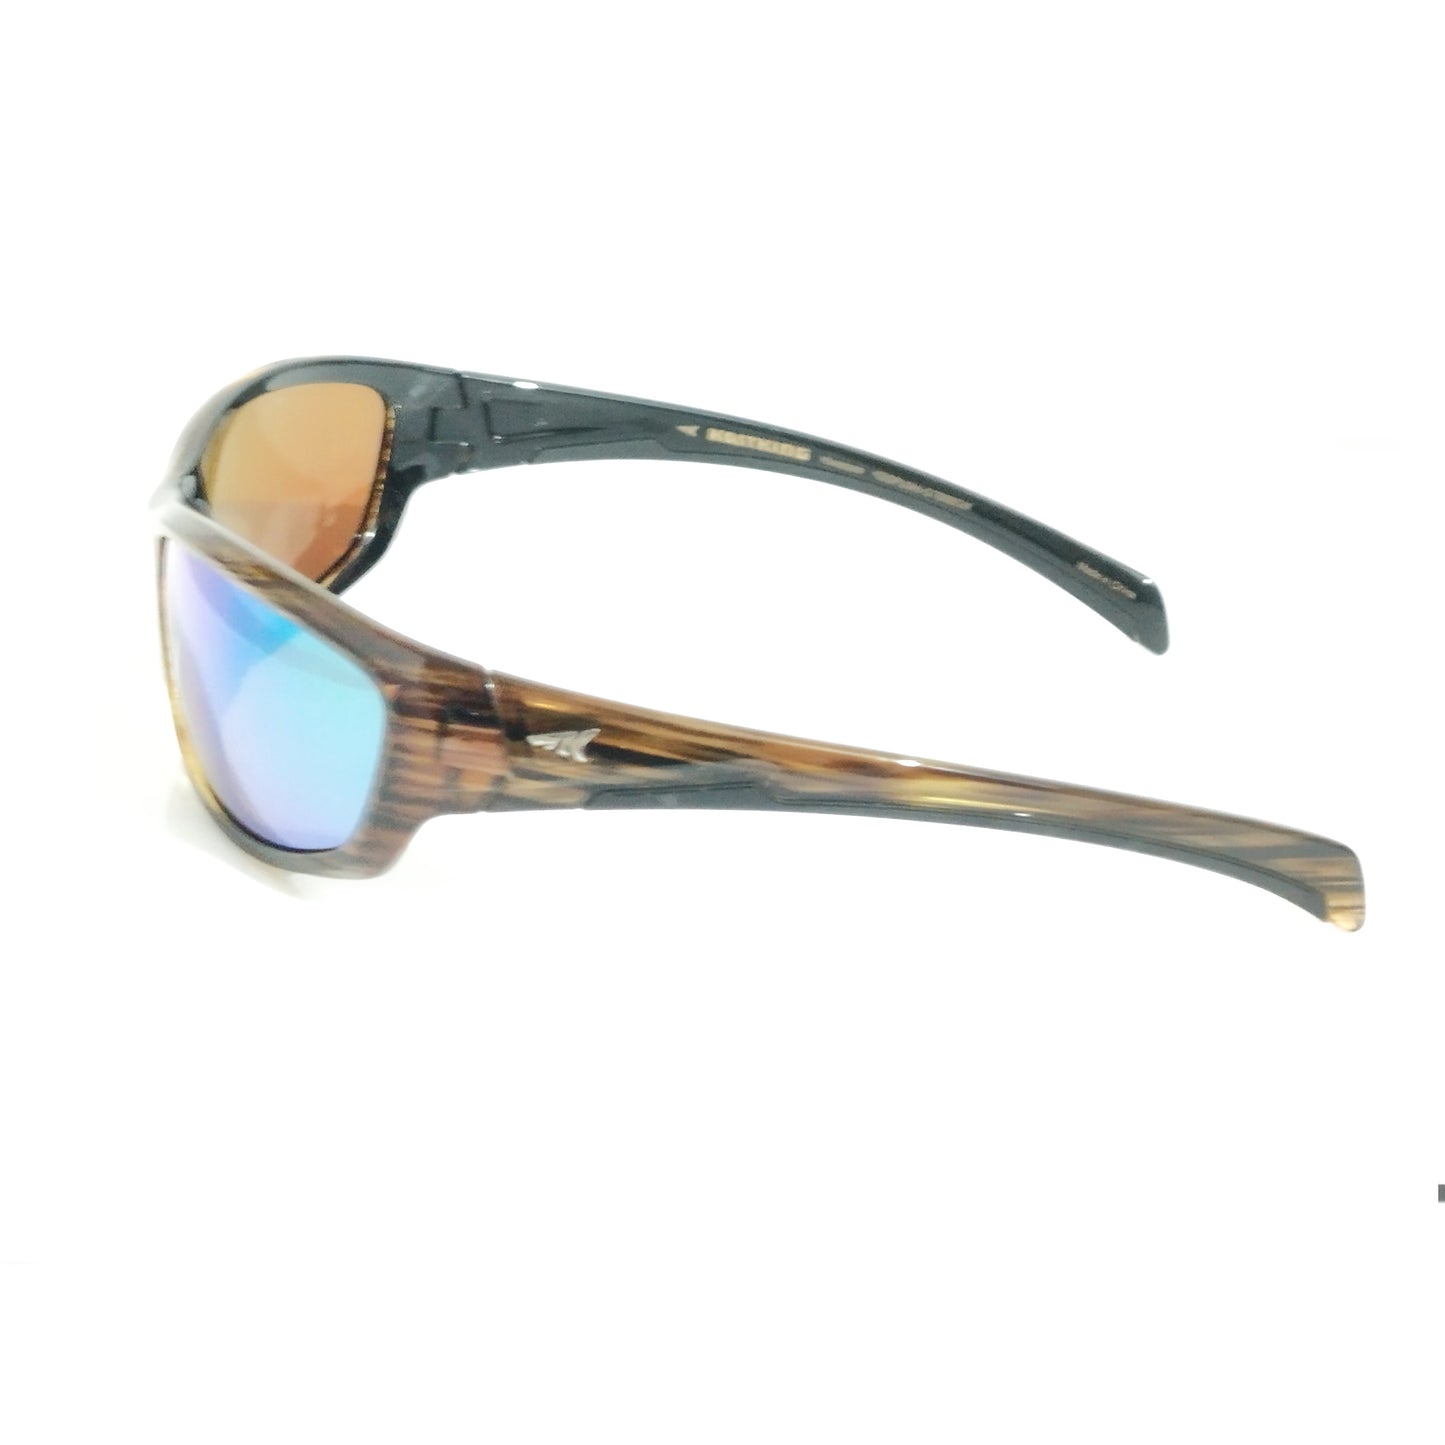 Polarized sunglasses for teens between 12-15 years